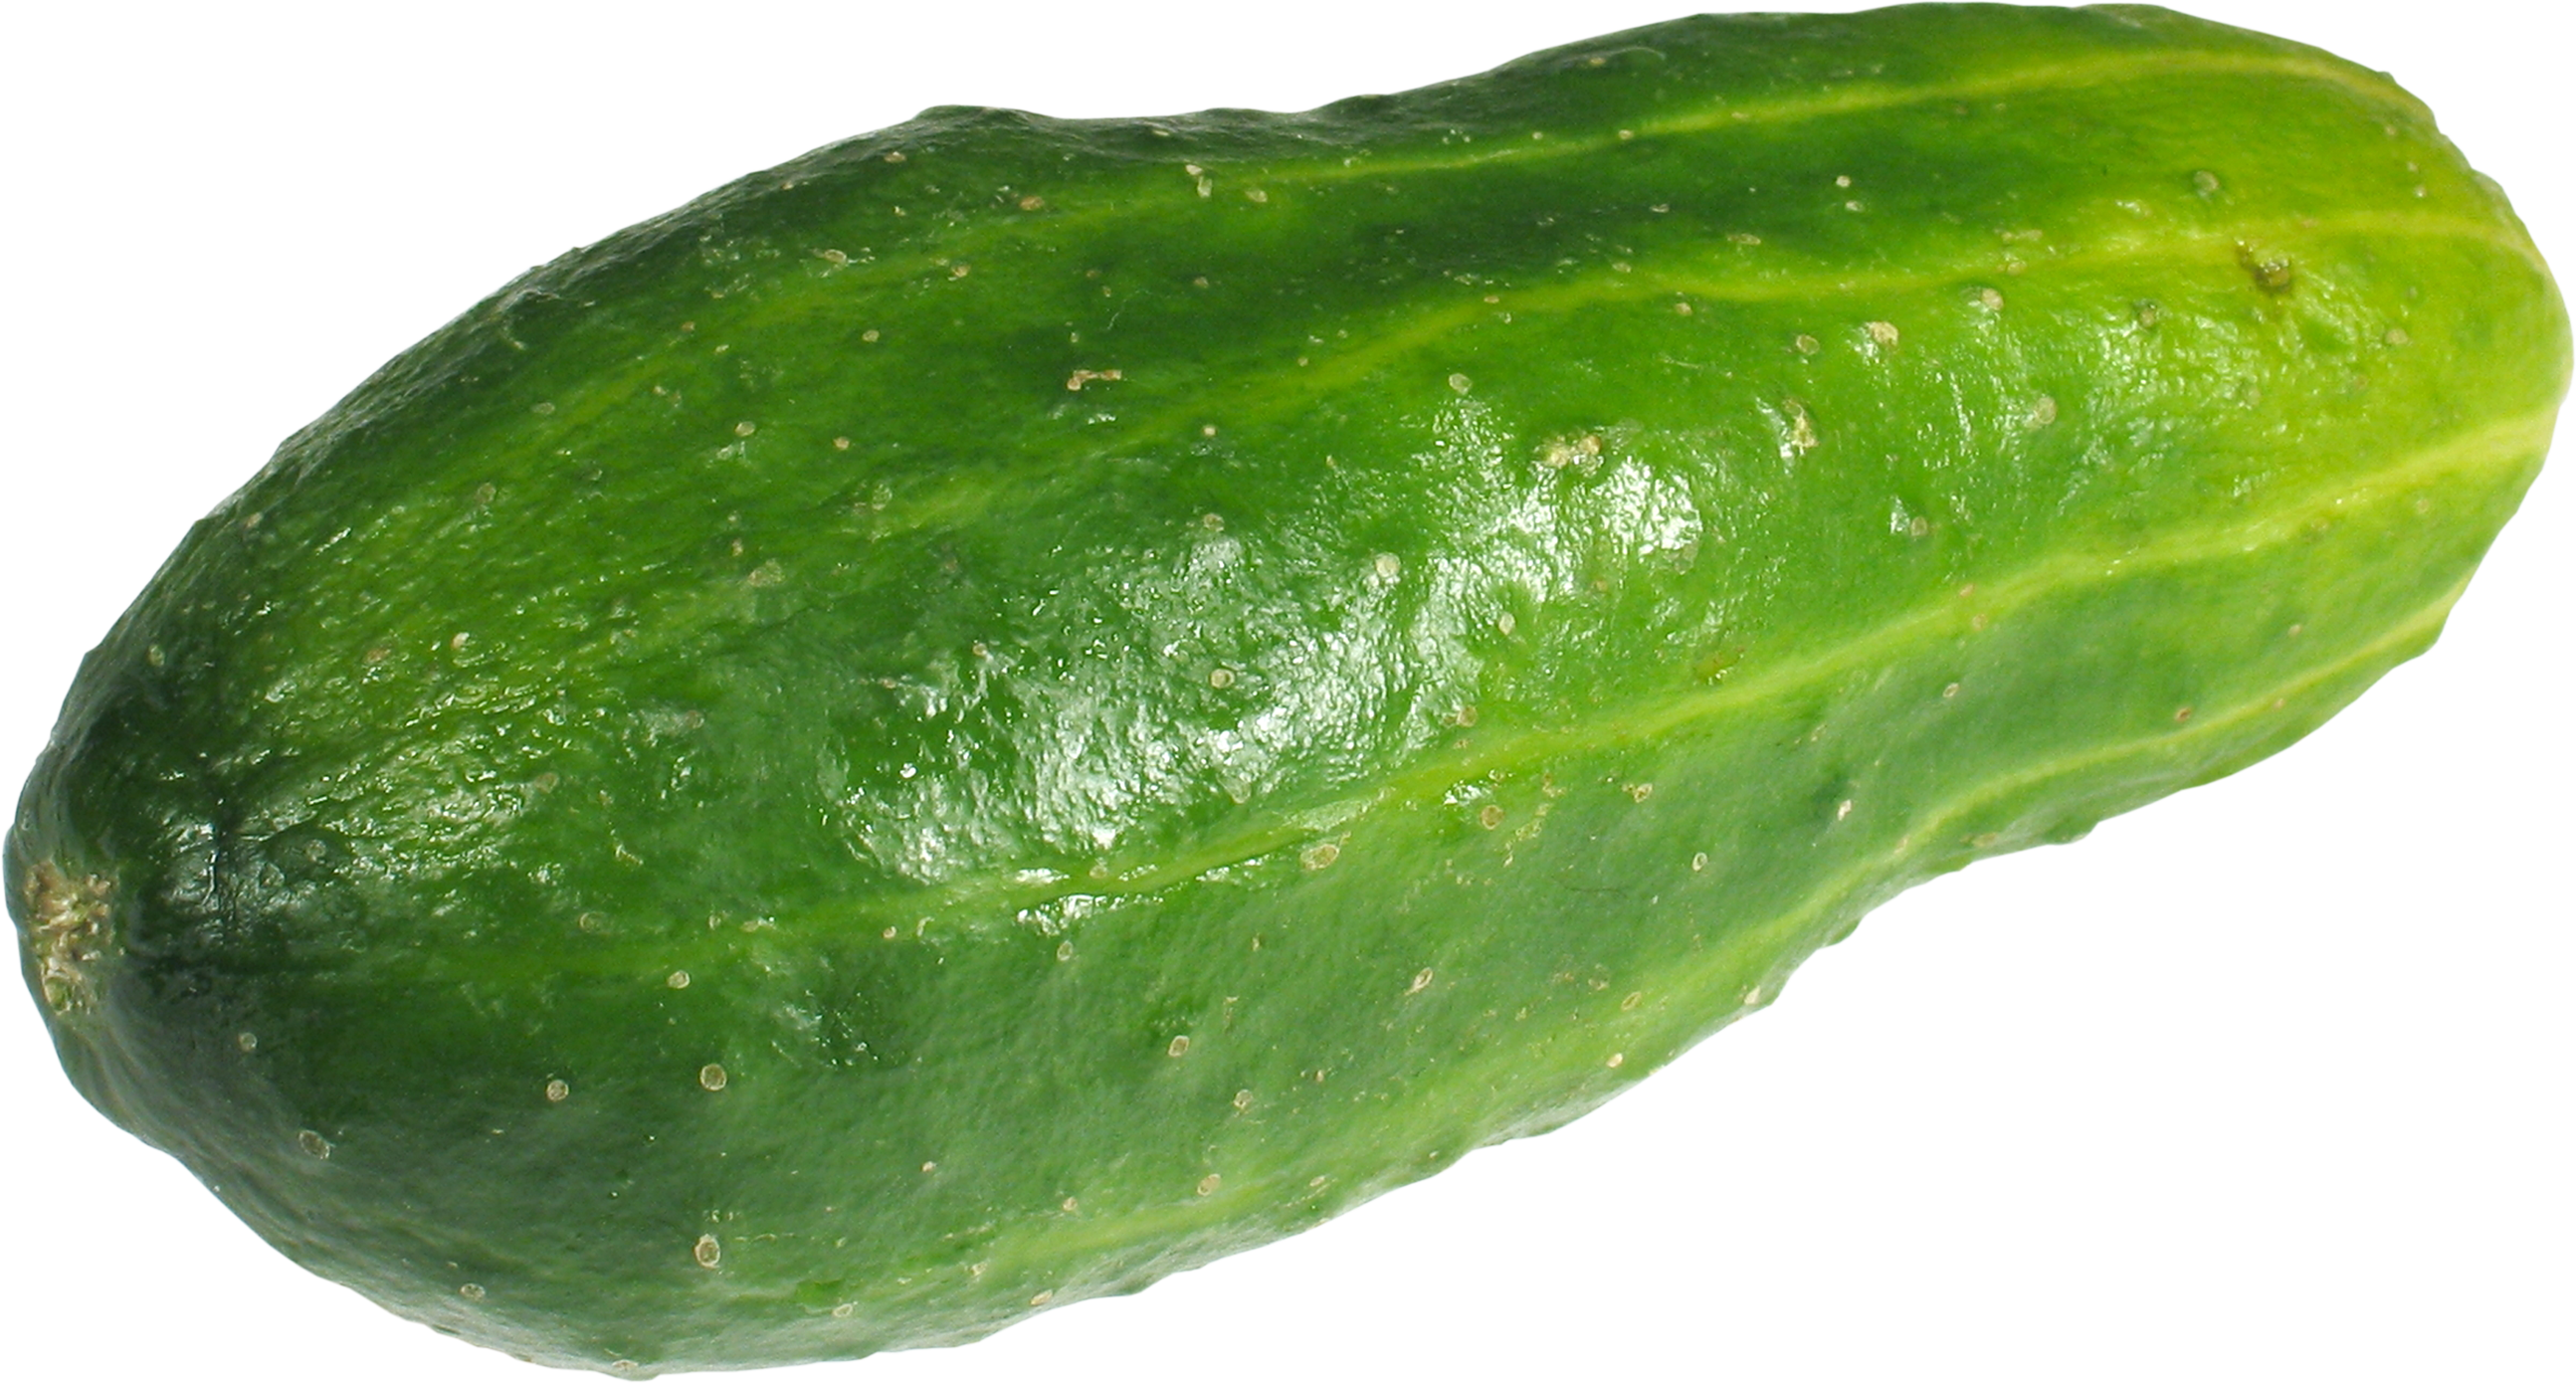 cucumber clipart outline